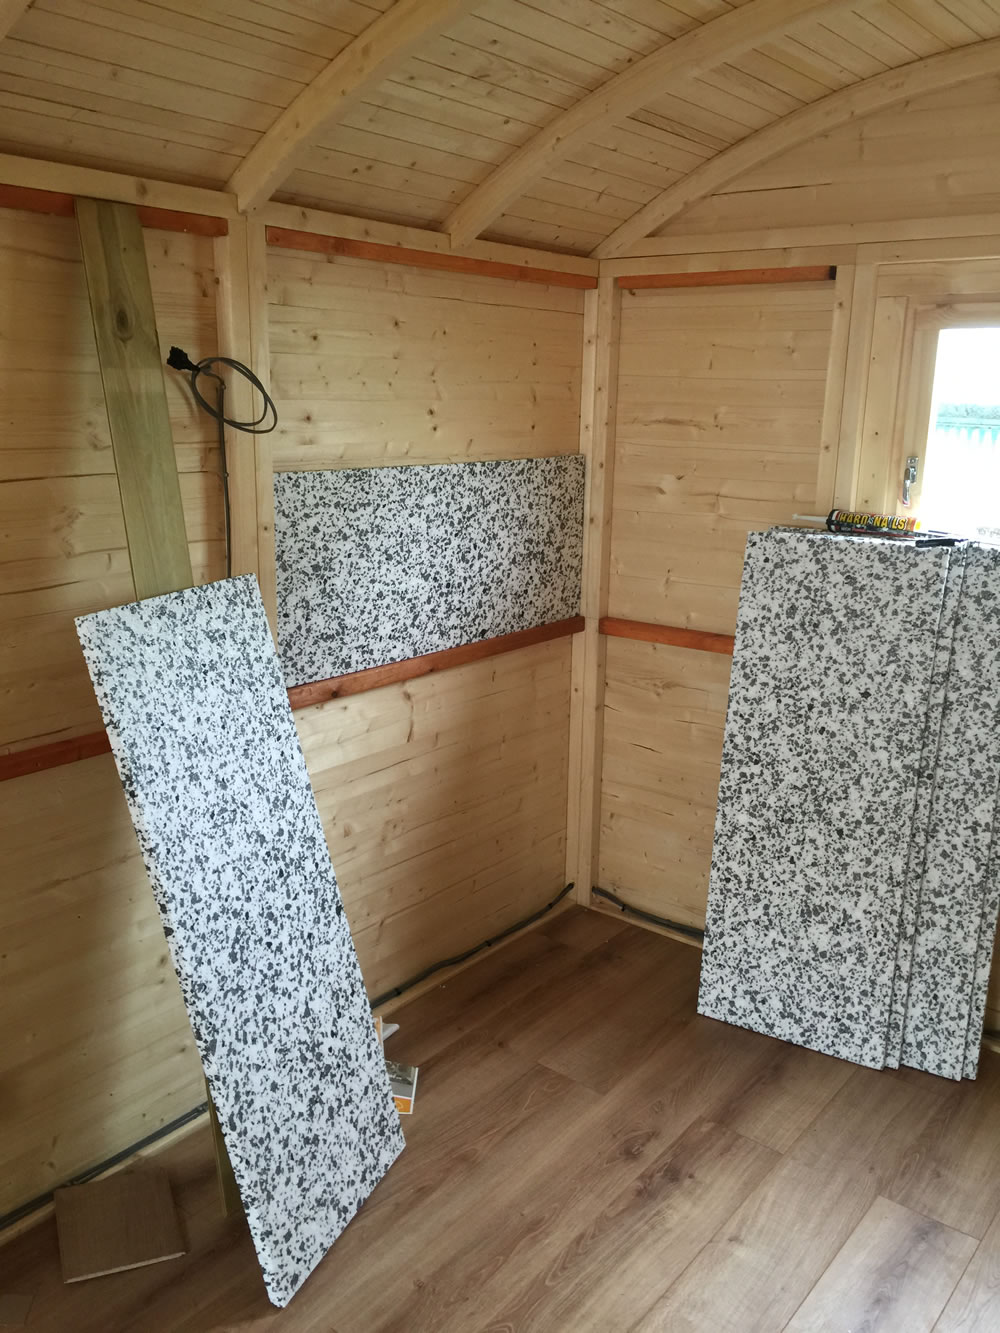 Insulation boards fitted in the wall panels.